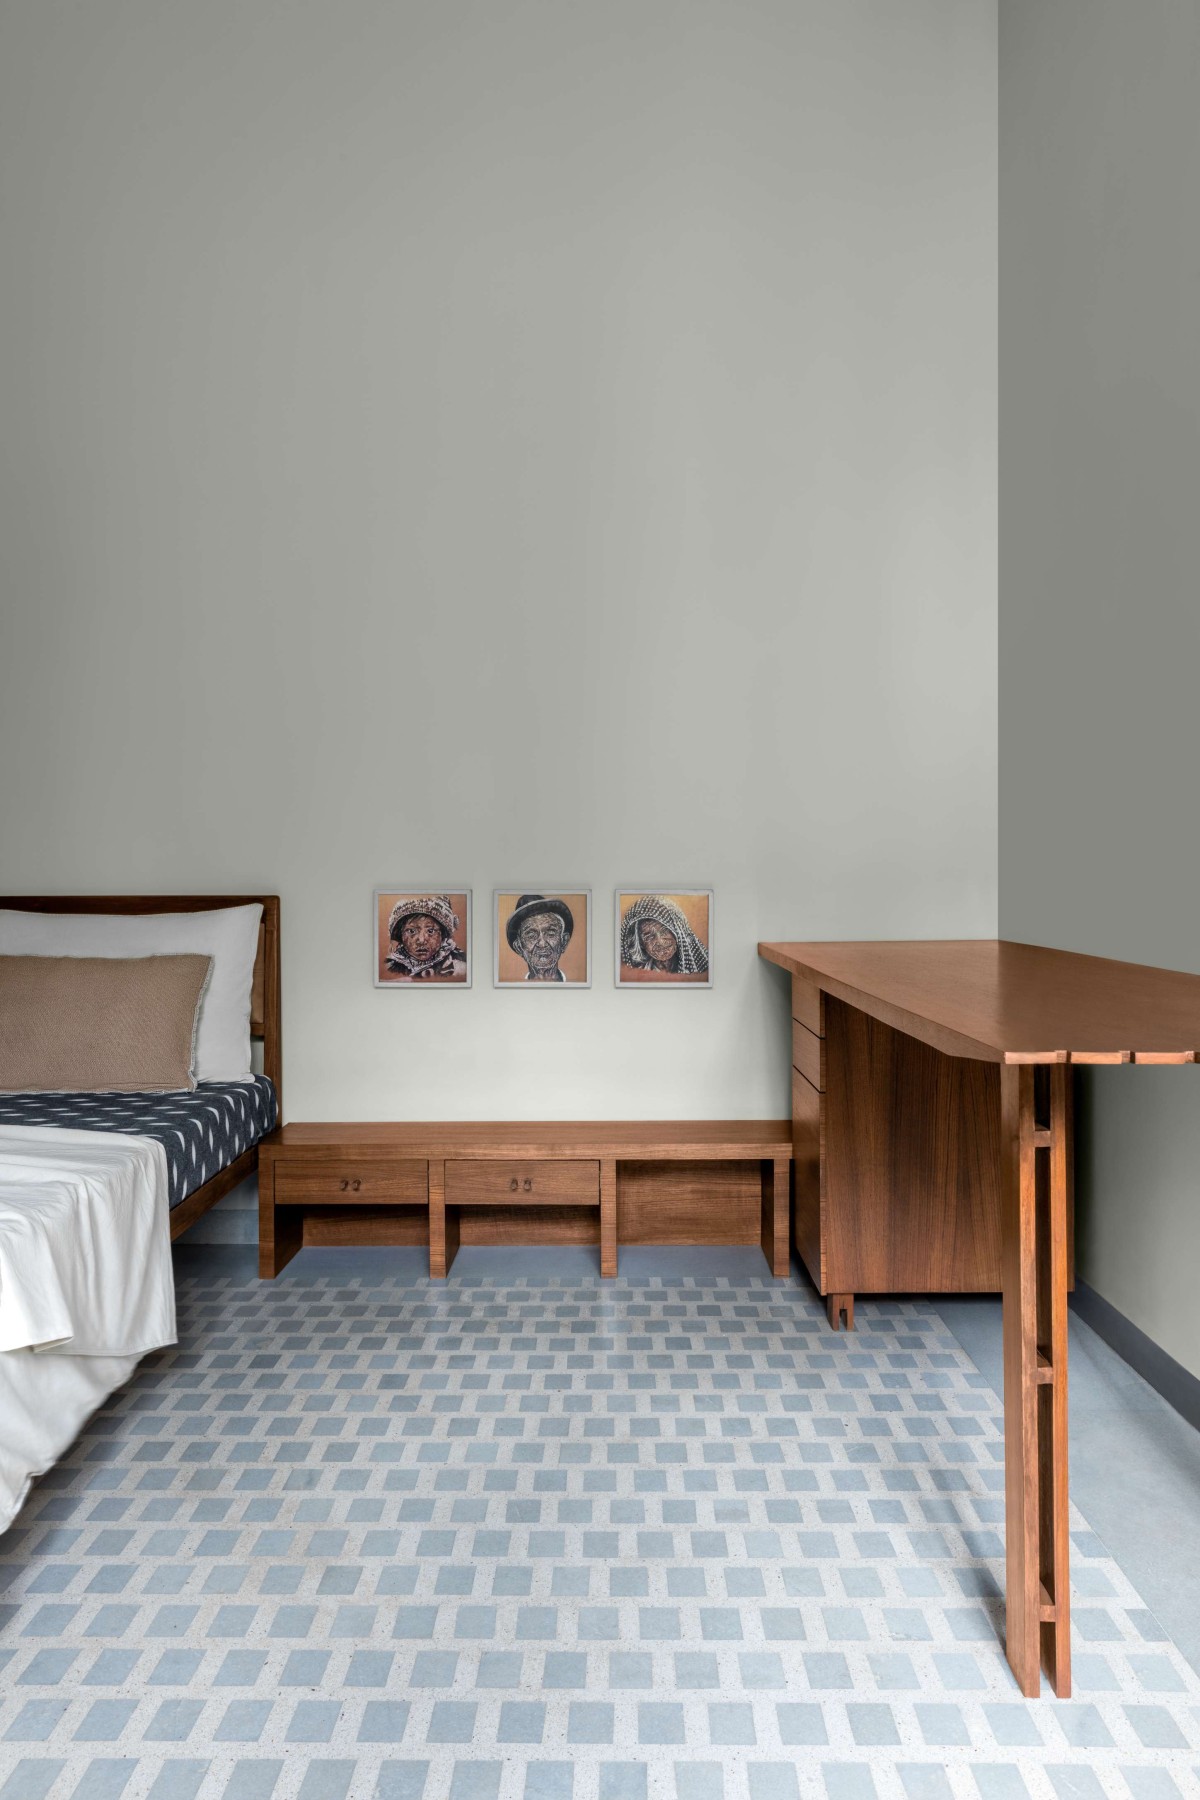 Master Bedroom of The Courtyard House by Atelier Varun Goyal